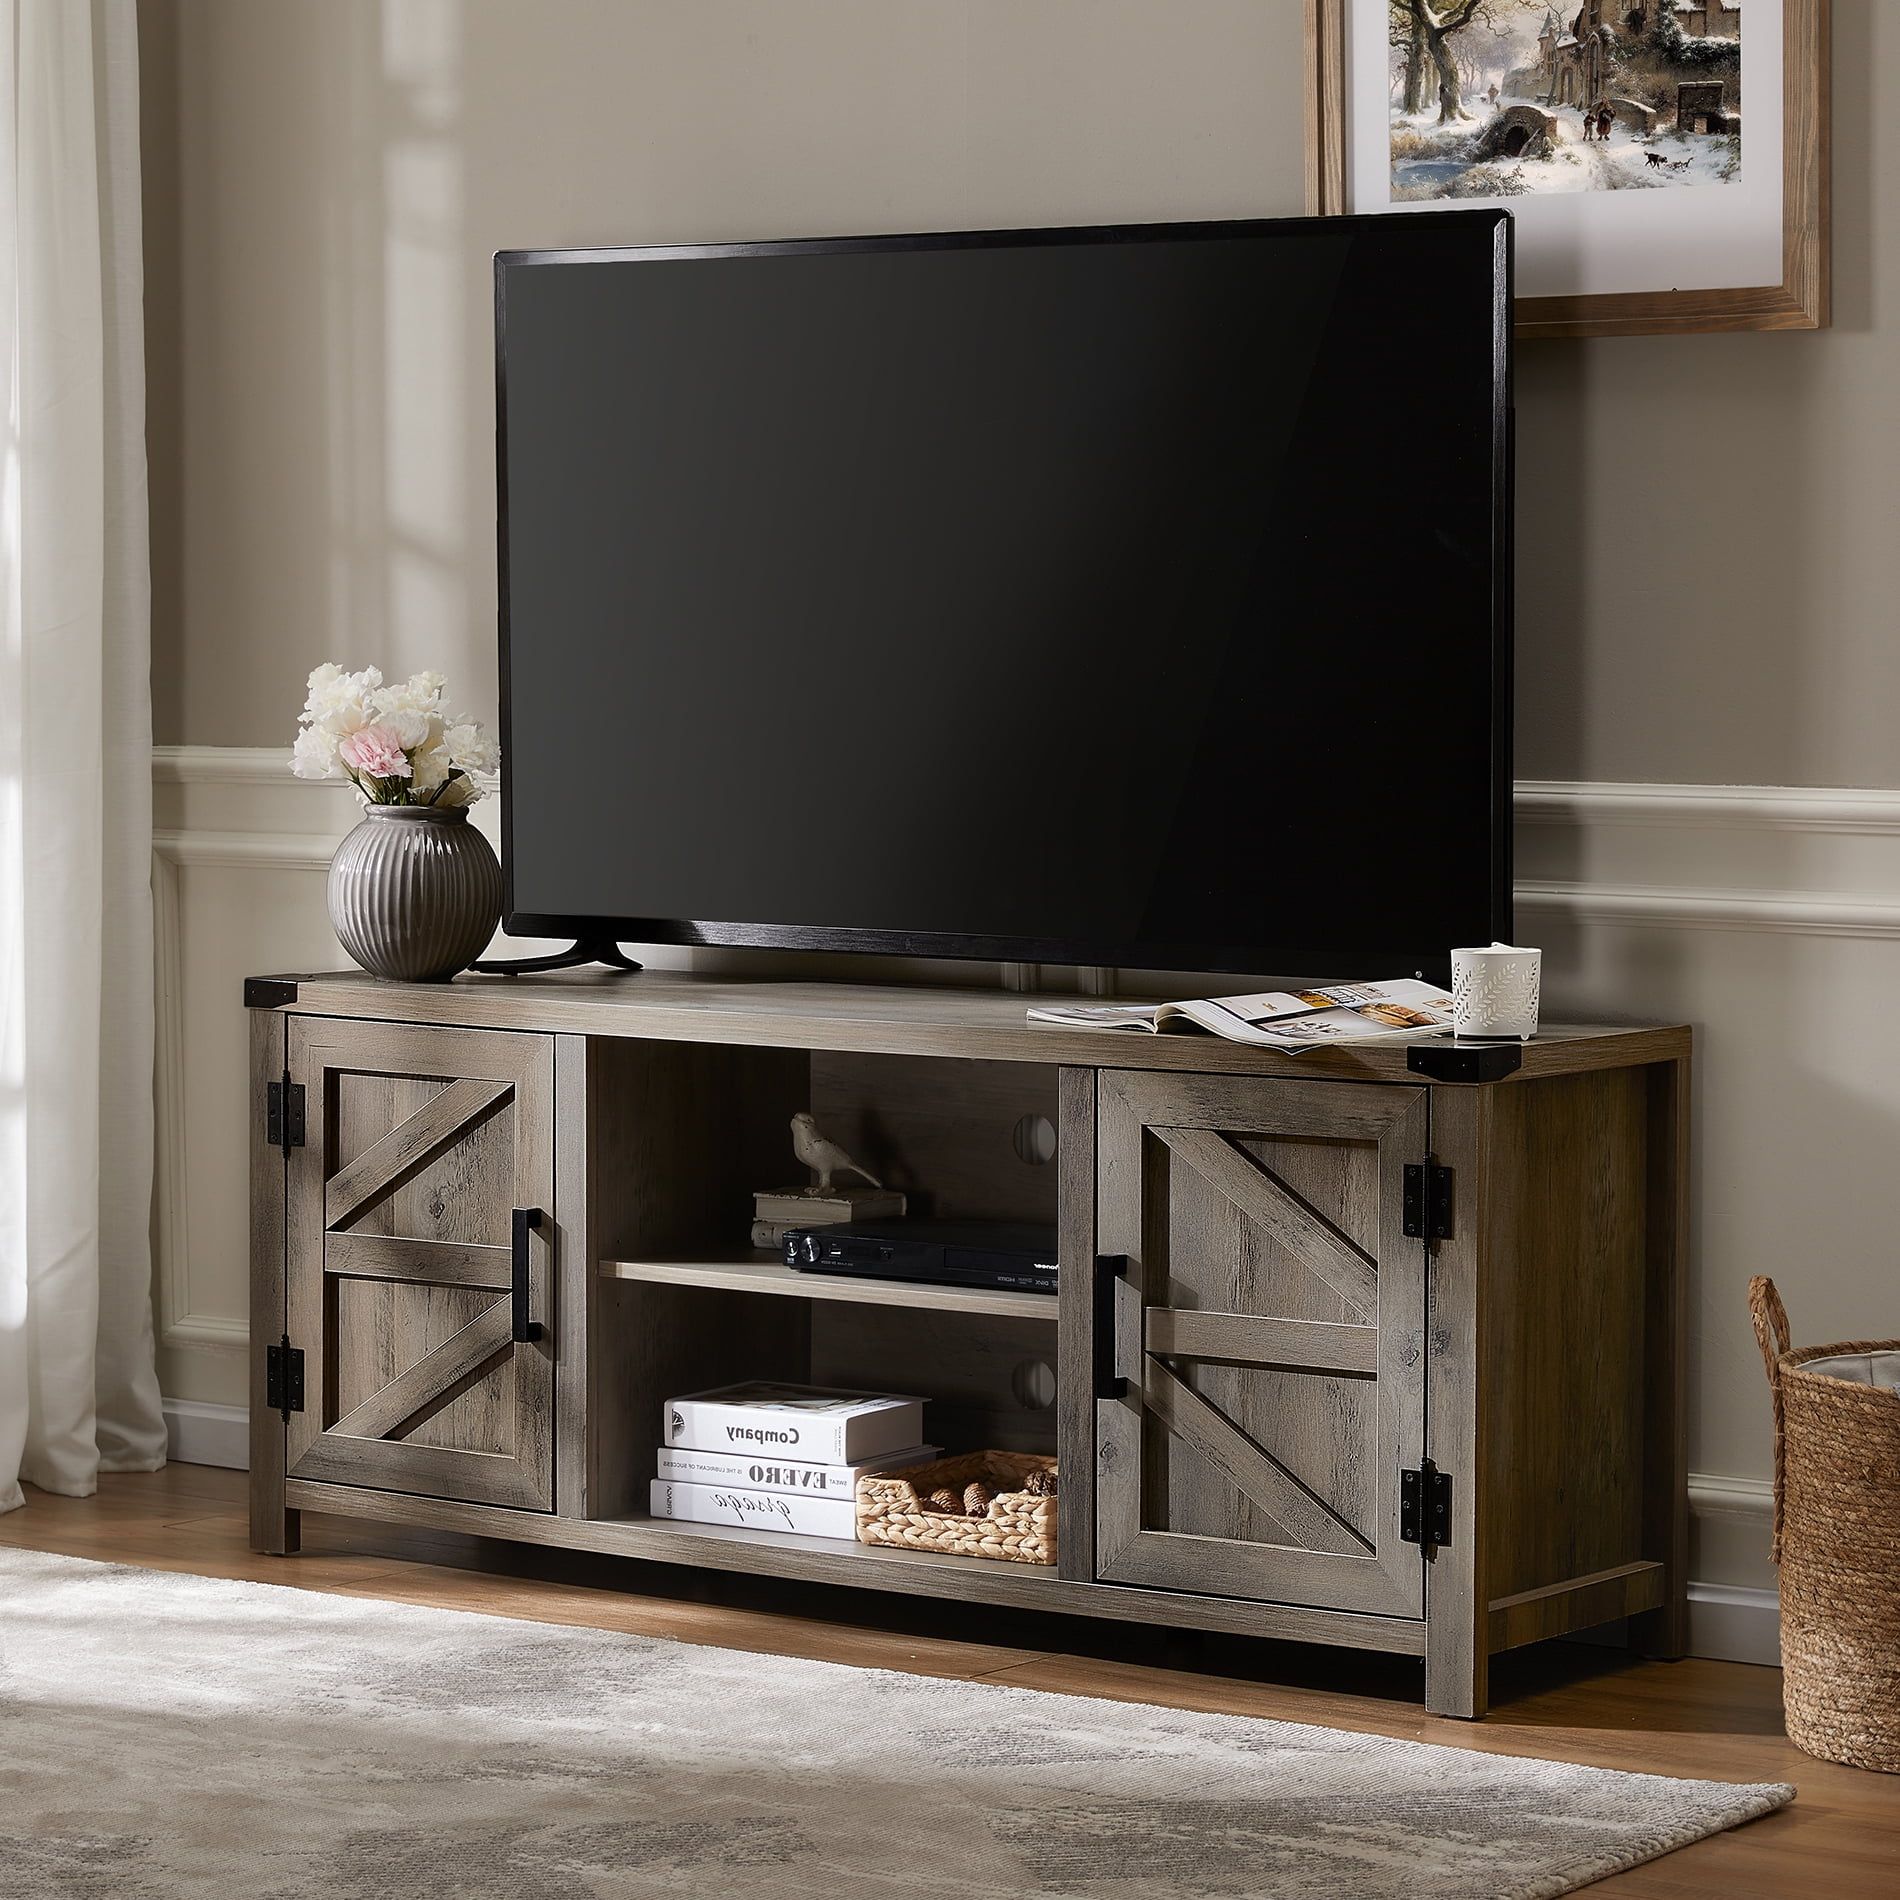 Living Room Furniture Home & Kitchen Fitueyes Wampat Wood Tv Stand For With Regard To 110" Tvs Wood Tv Cabinet With Drawers (View 8 of 20)